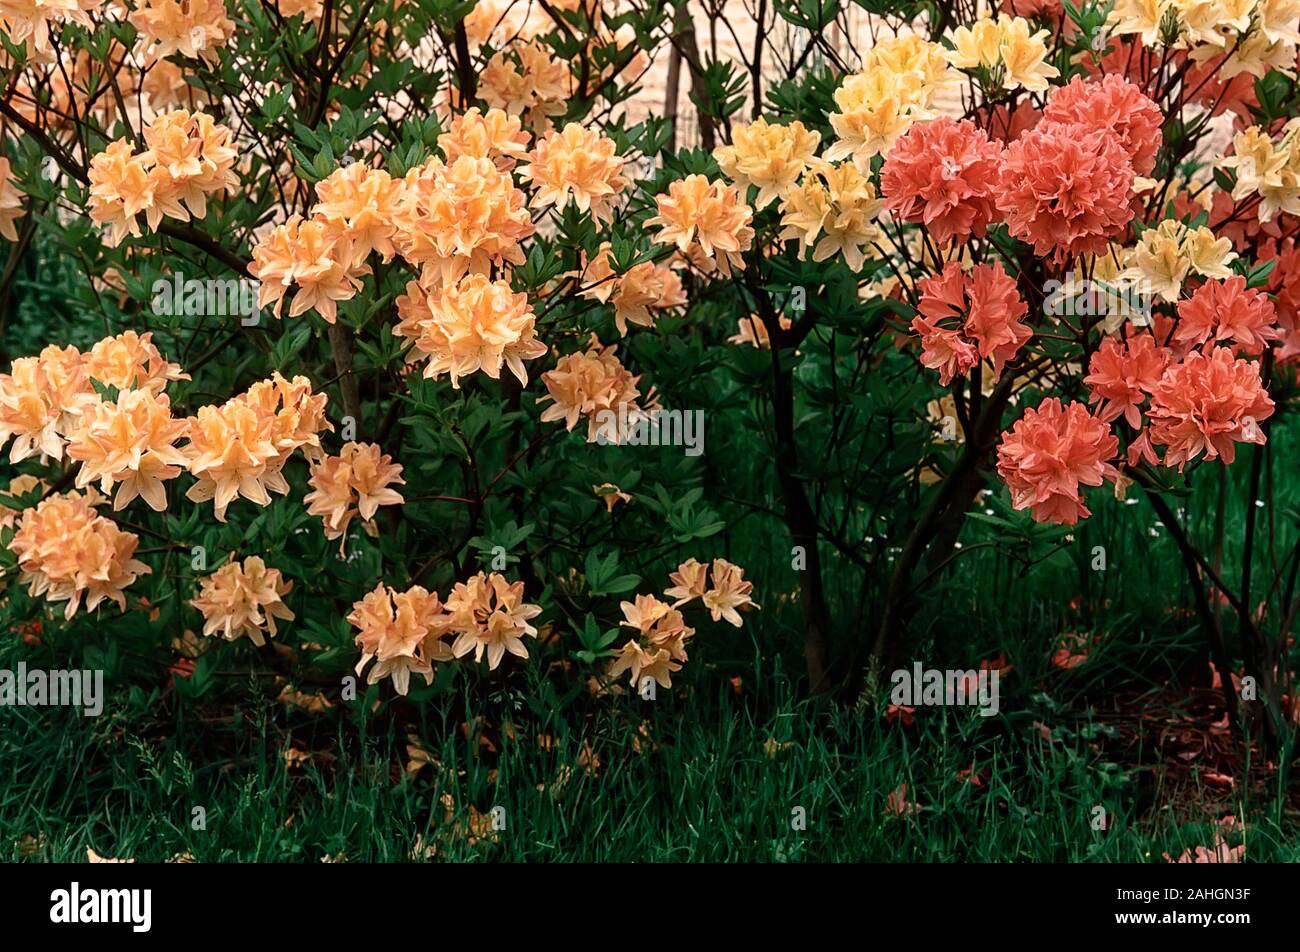 Rhododendron cv. Lemonora (Left) and Rhododendron cv. Doctor. M. Oosthoek (Right), Ericaceae, Azalea mollis, decidous shurbs, flower yellow and orange Stock Photo